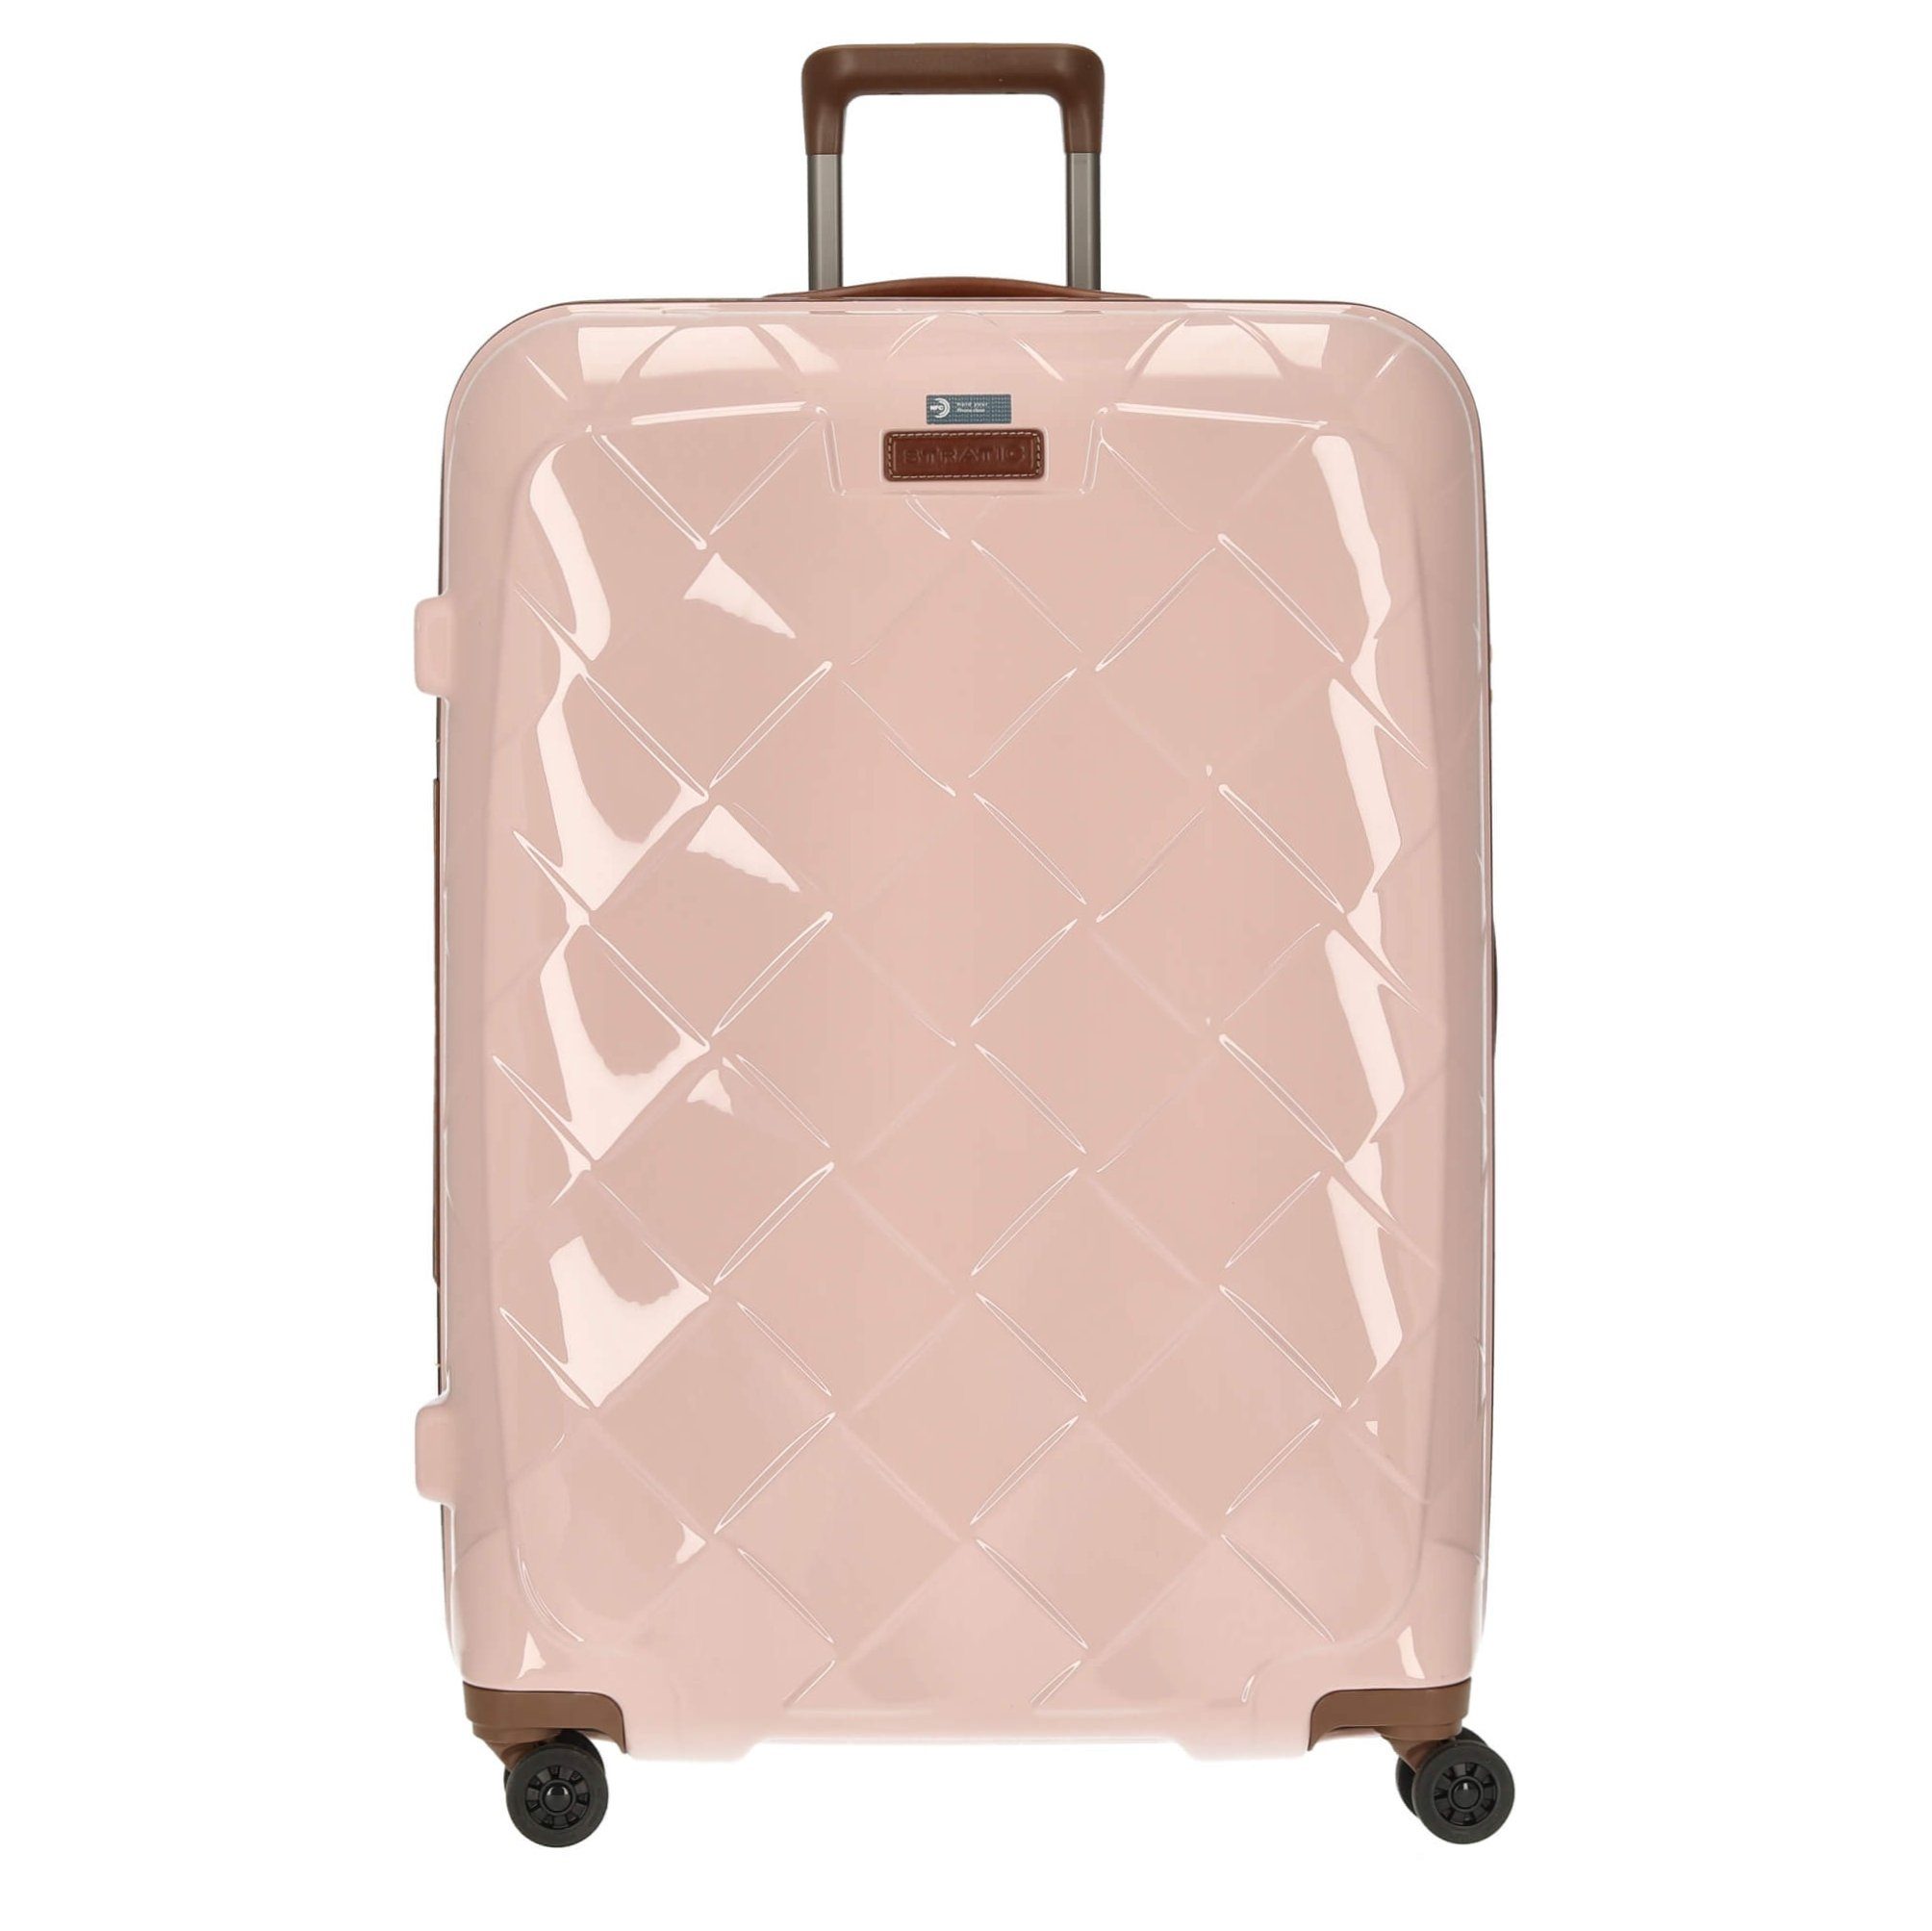 Stratic Trolley Leather and More - 4-Rollen-Trolley 76 cm L, 4 Rollen rose